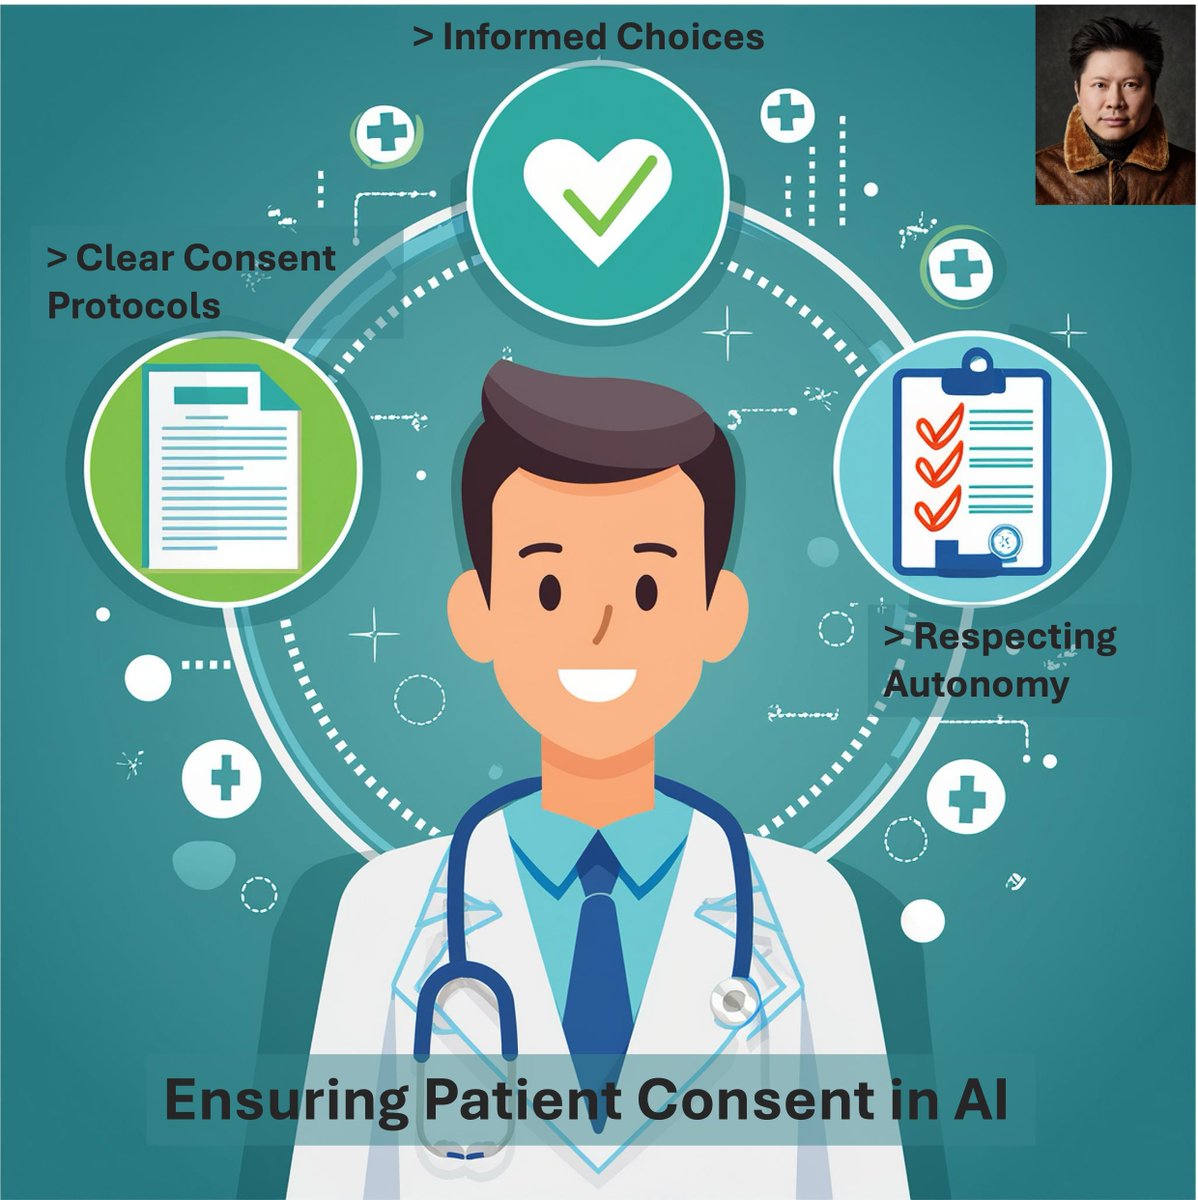 Patient consent is crucial for ethical AI in healthcare. How do we ensure clear and informed choices? #EthicsInAI #HealthTech